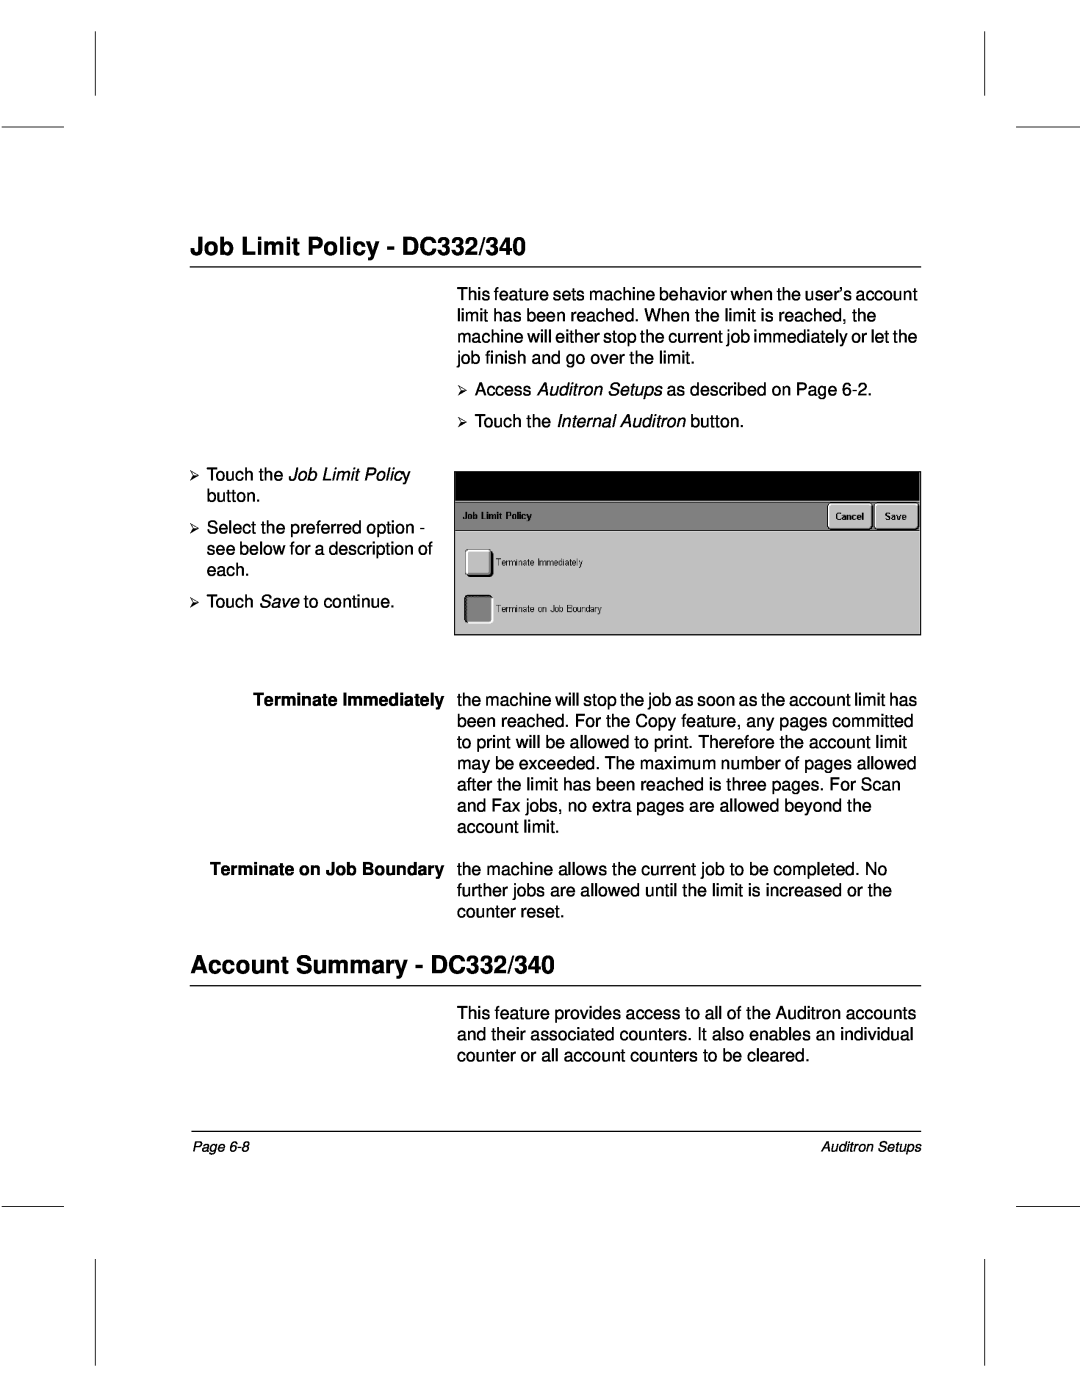 Xerox 220, 230 setup guide Job Limit Policy - DC332/340, Account Summary - DC332/340, Touch the Job Limit Policy 